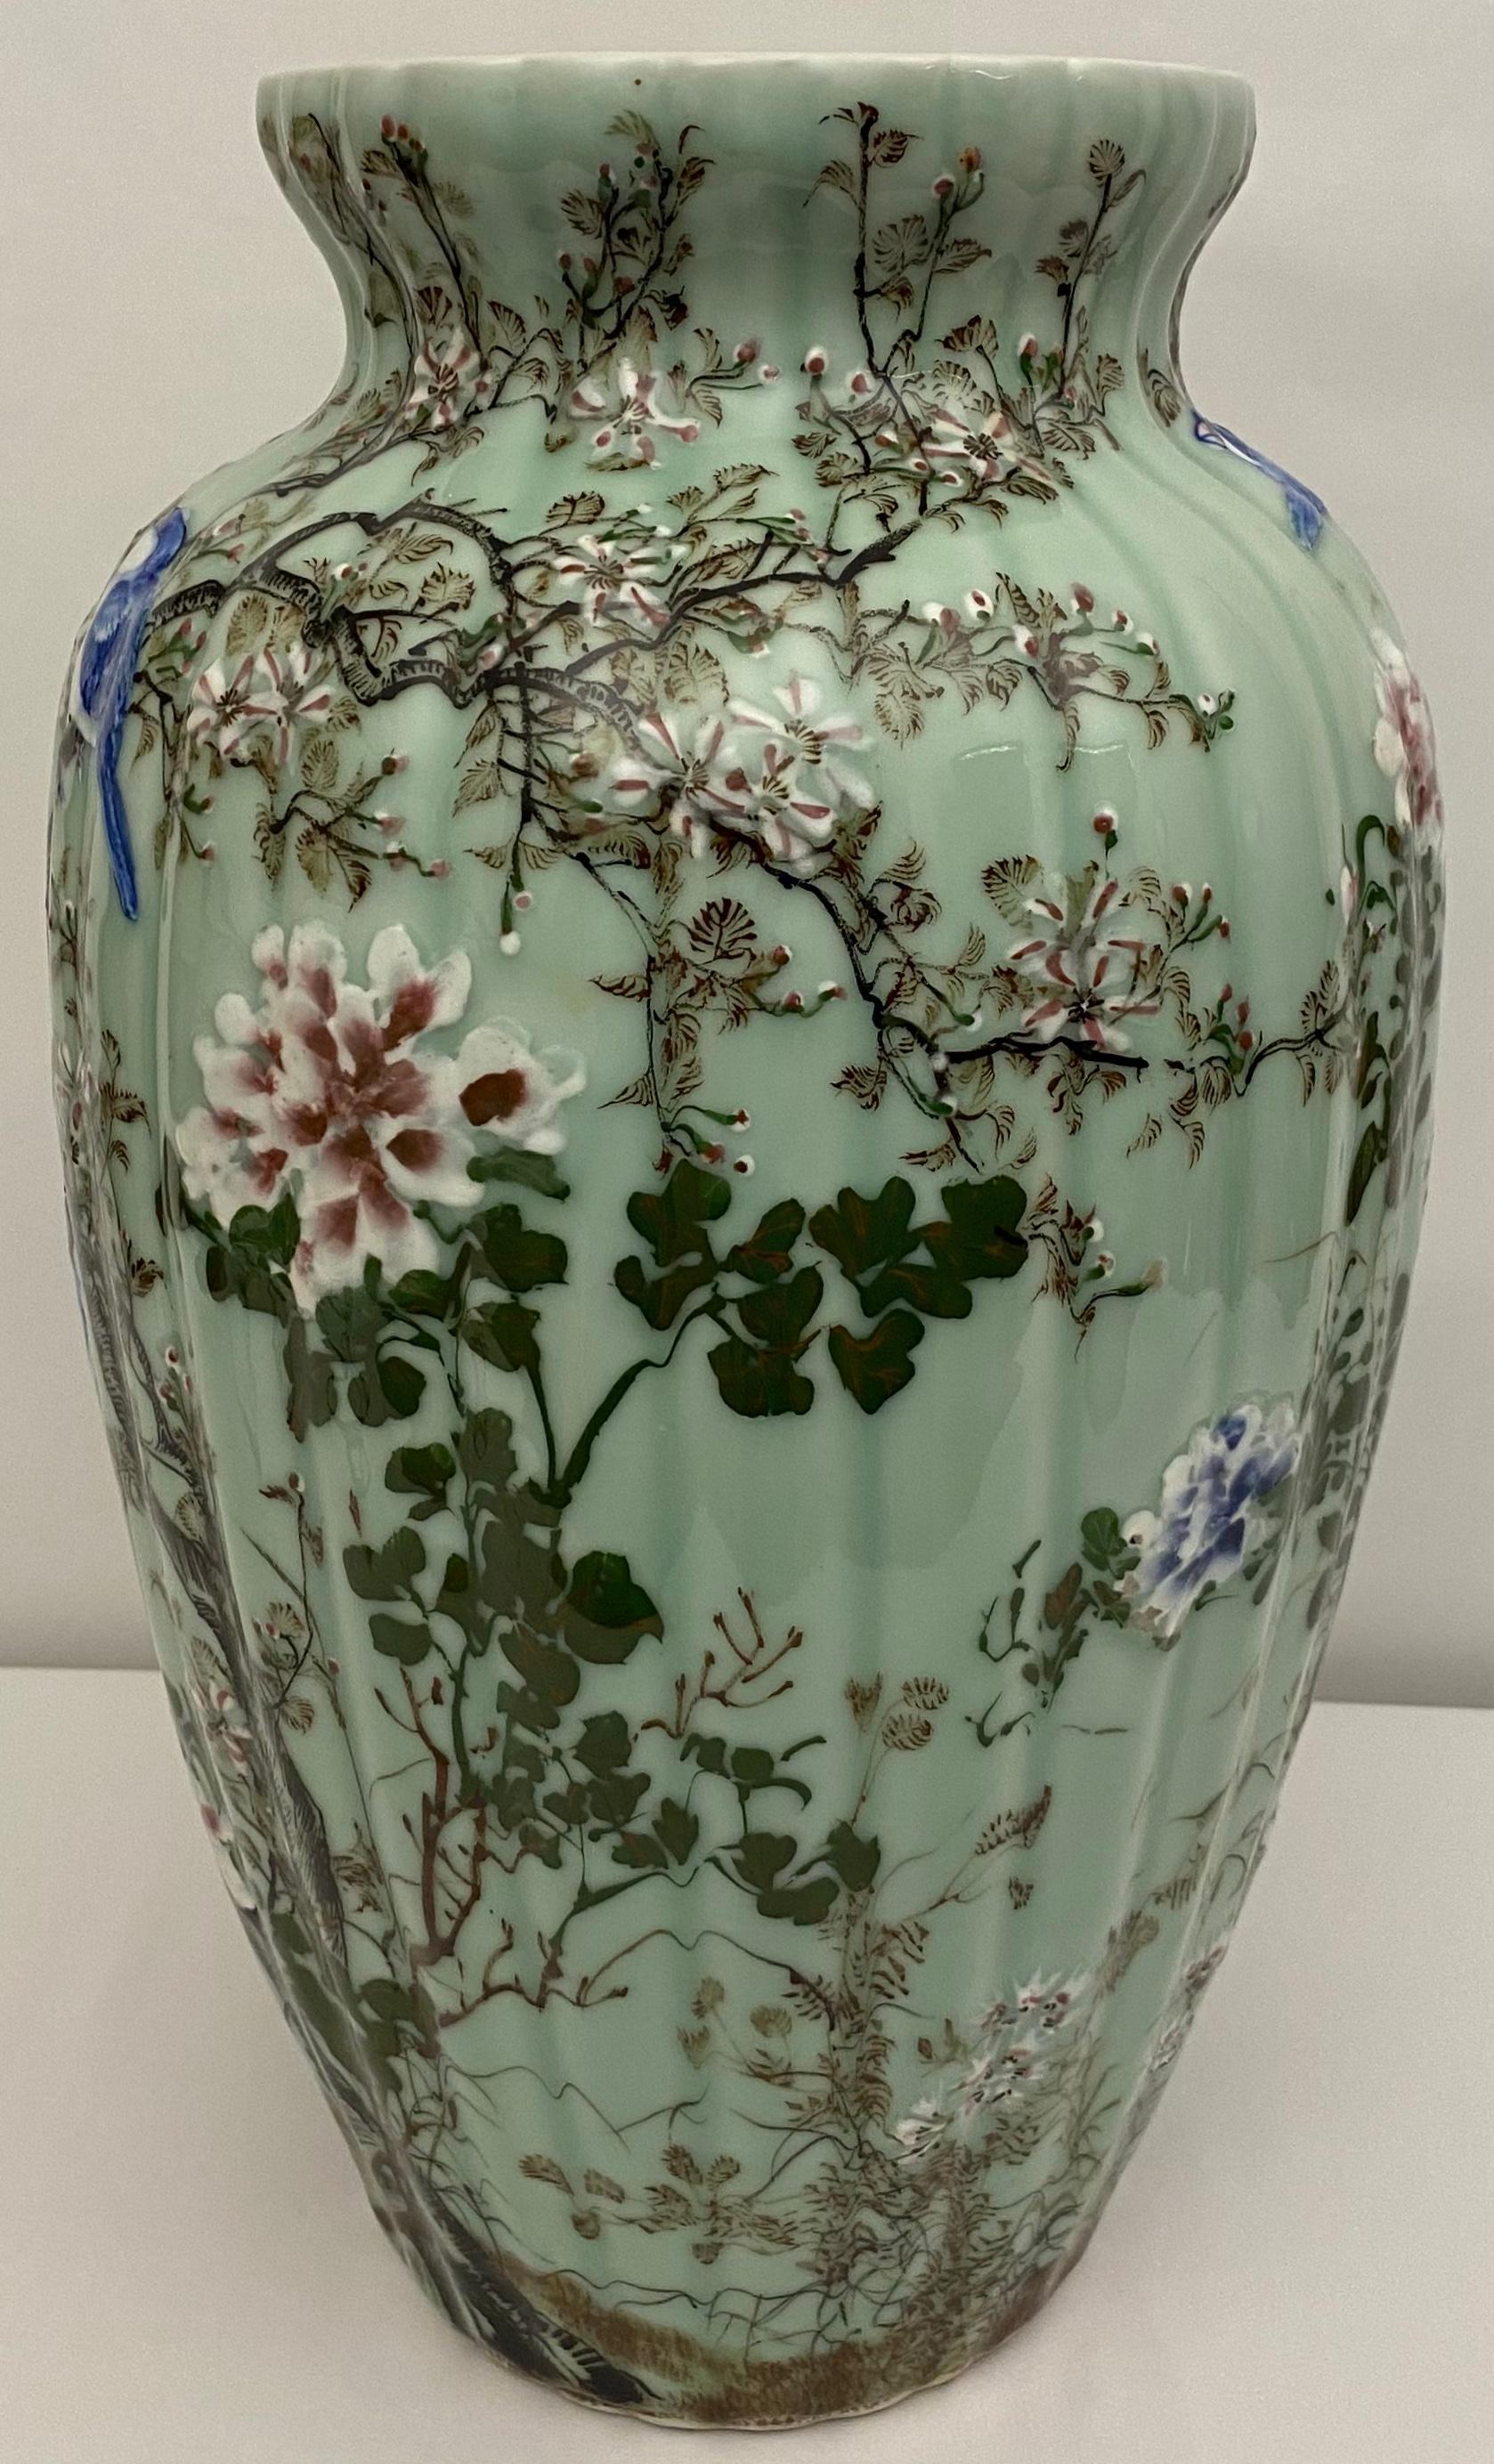 This captivating Medji period (1868-1912) porcelain vase features a mesmerizing celadon glaze, with a subtle crackled texture. Exquisite details, meticulously hand-painted in vibrant blue, white, greens, and pale pink enamels, adorn the surface in